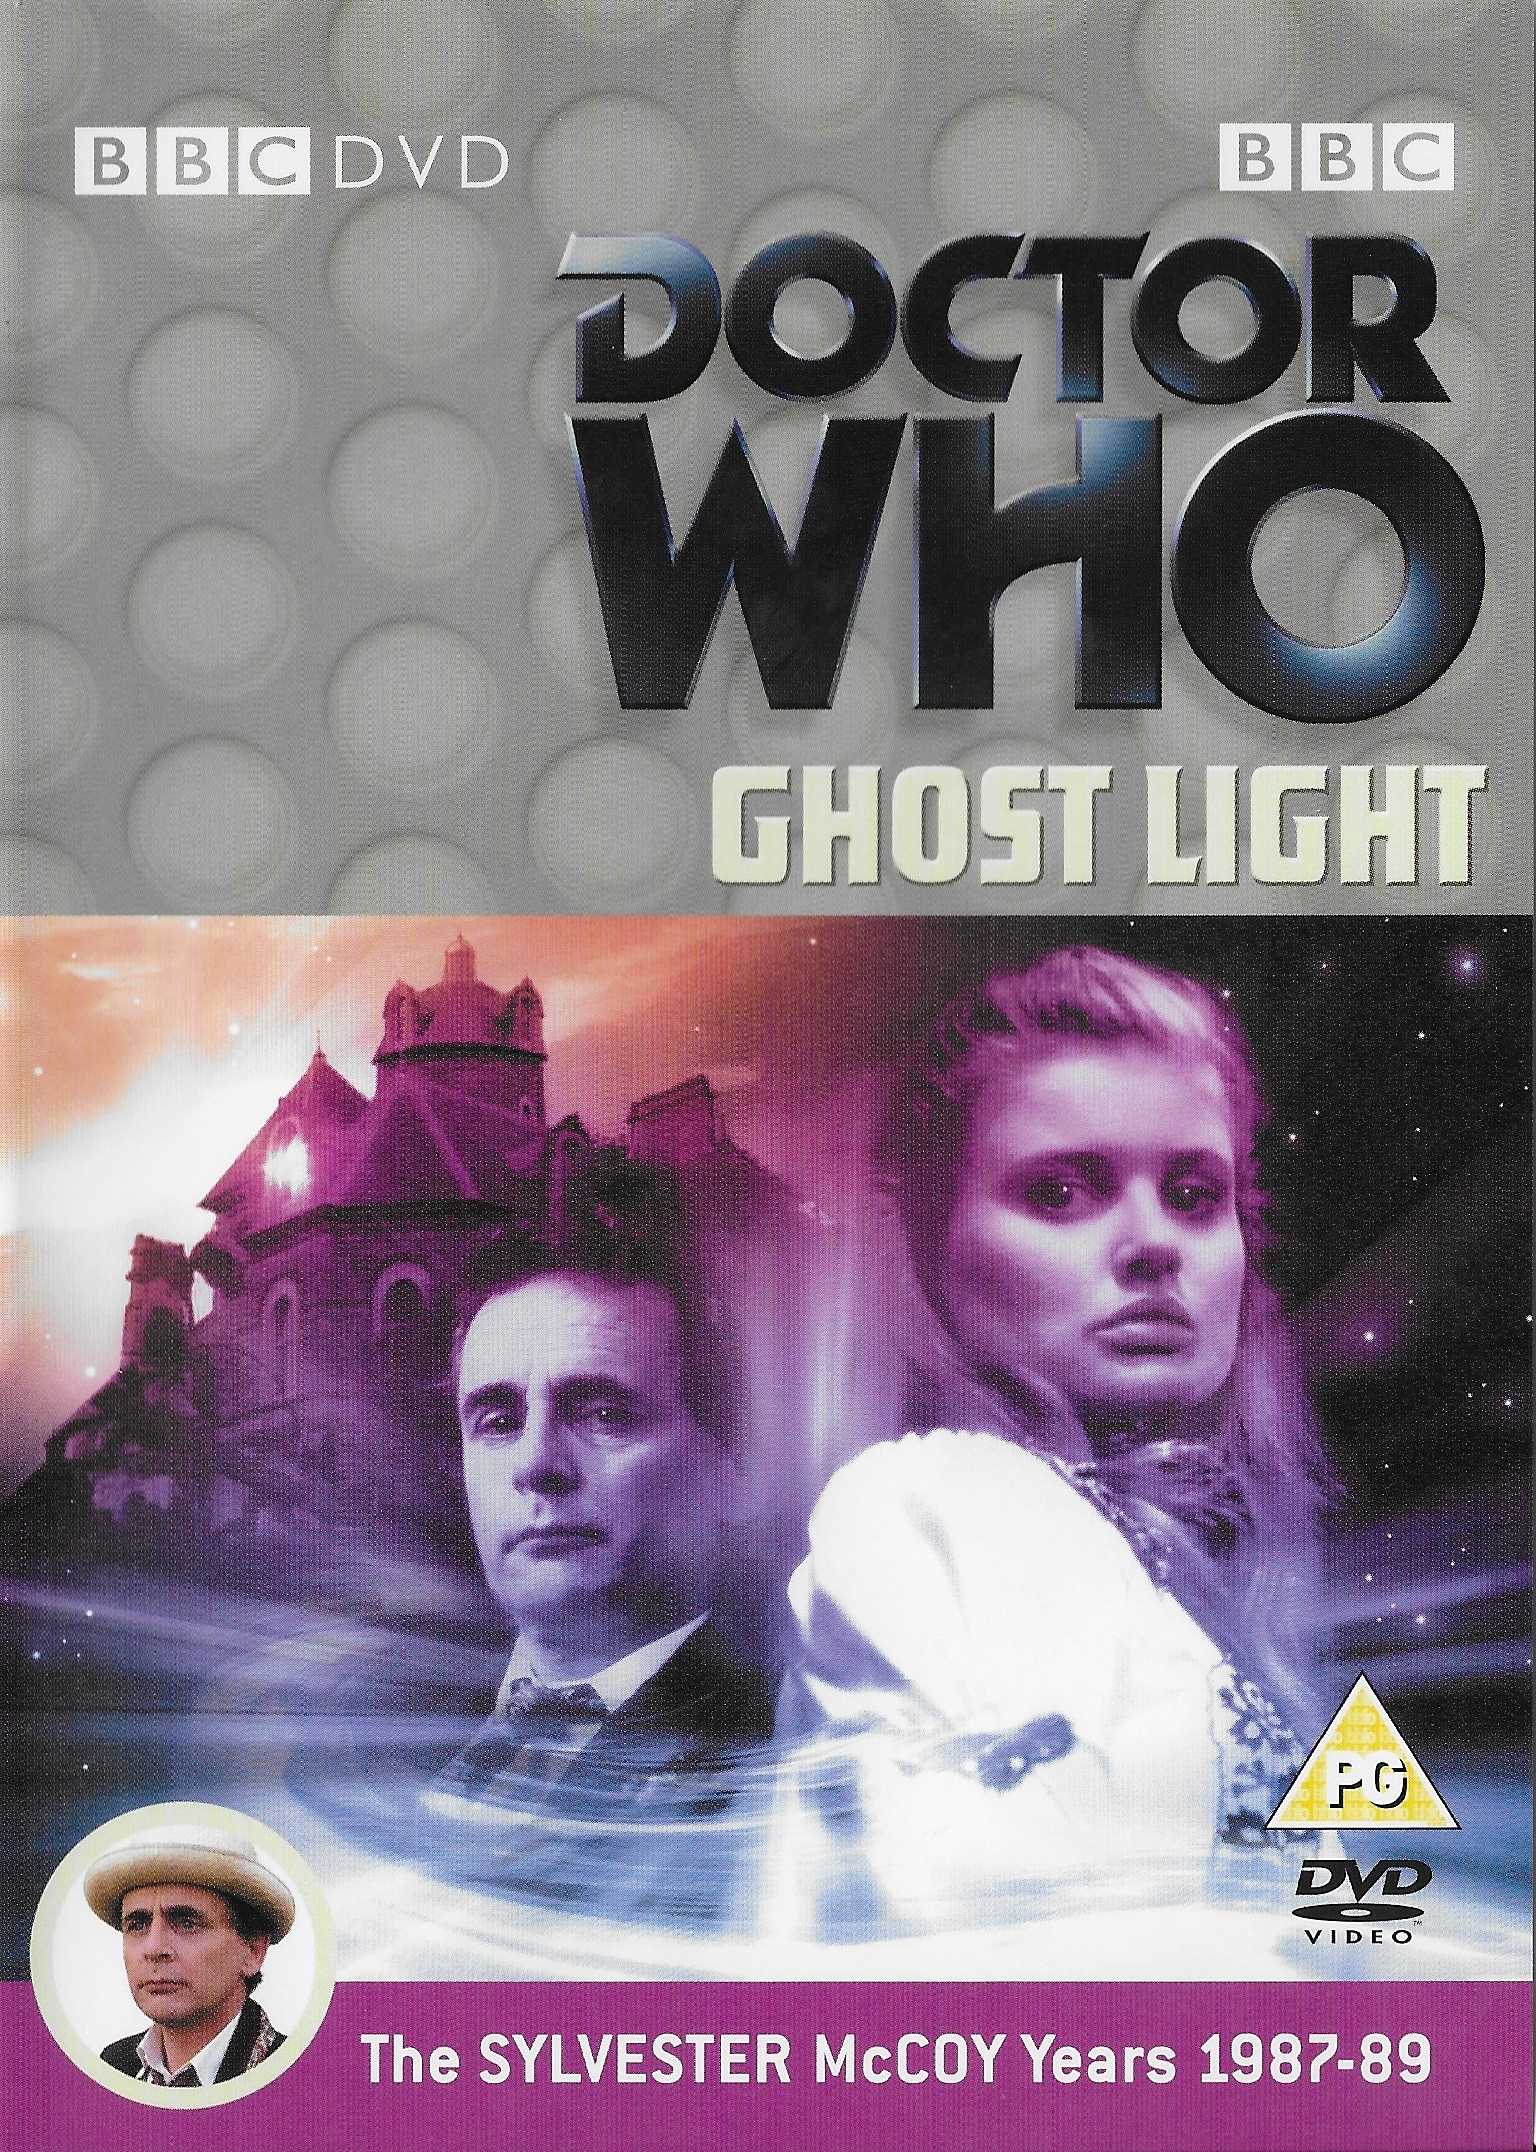 Picture of BBCDVD 1352 Doctor Who - Ghostlight by artist Marc Platt from the BBC records and Tapes library